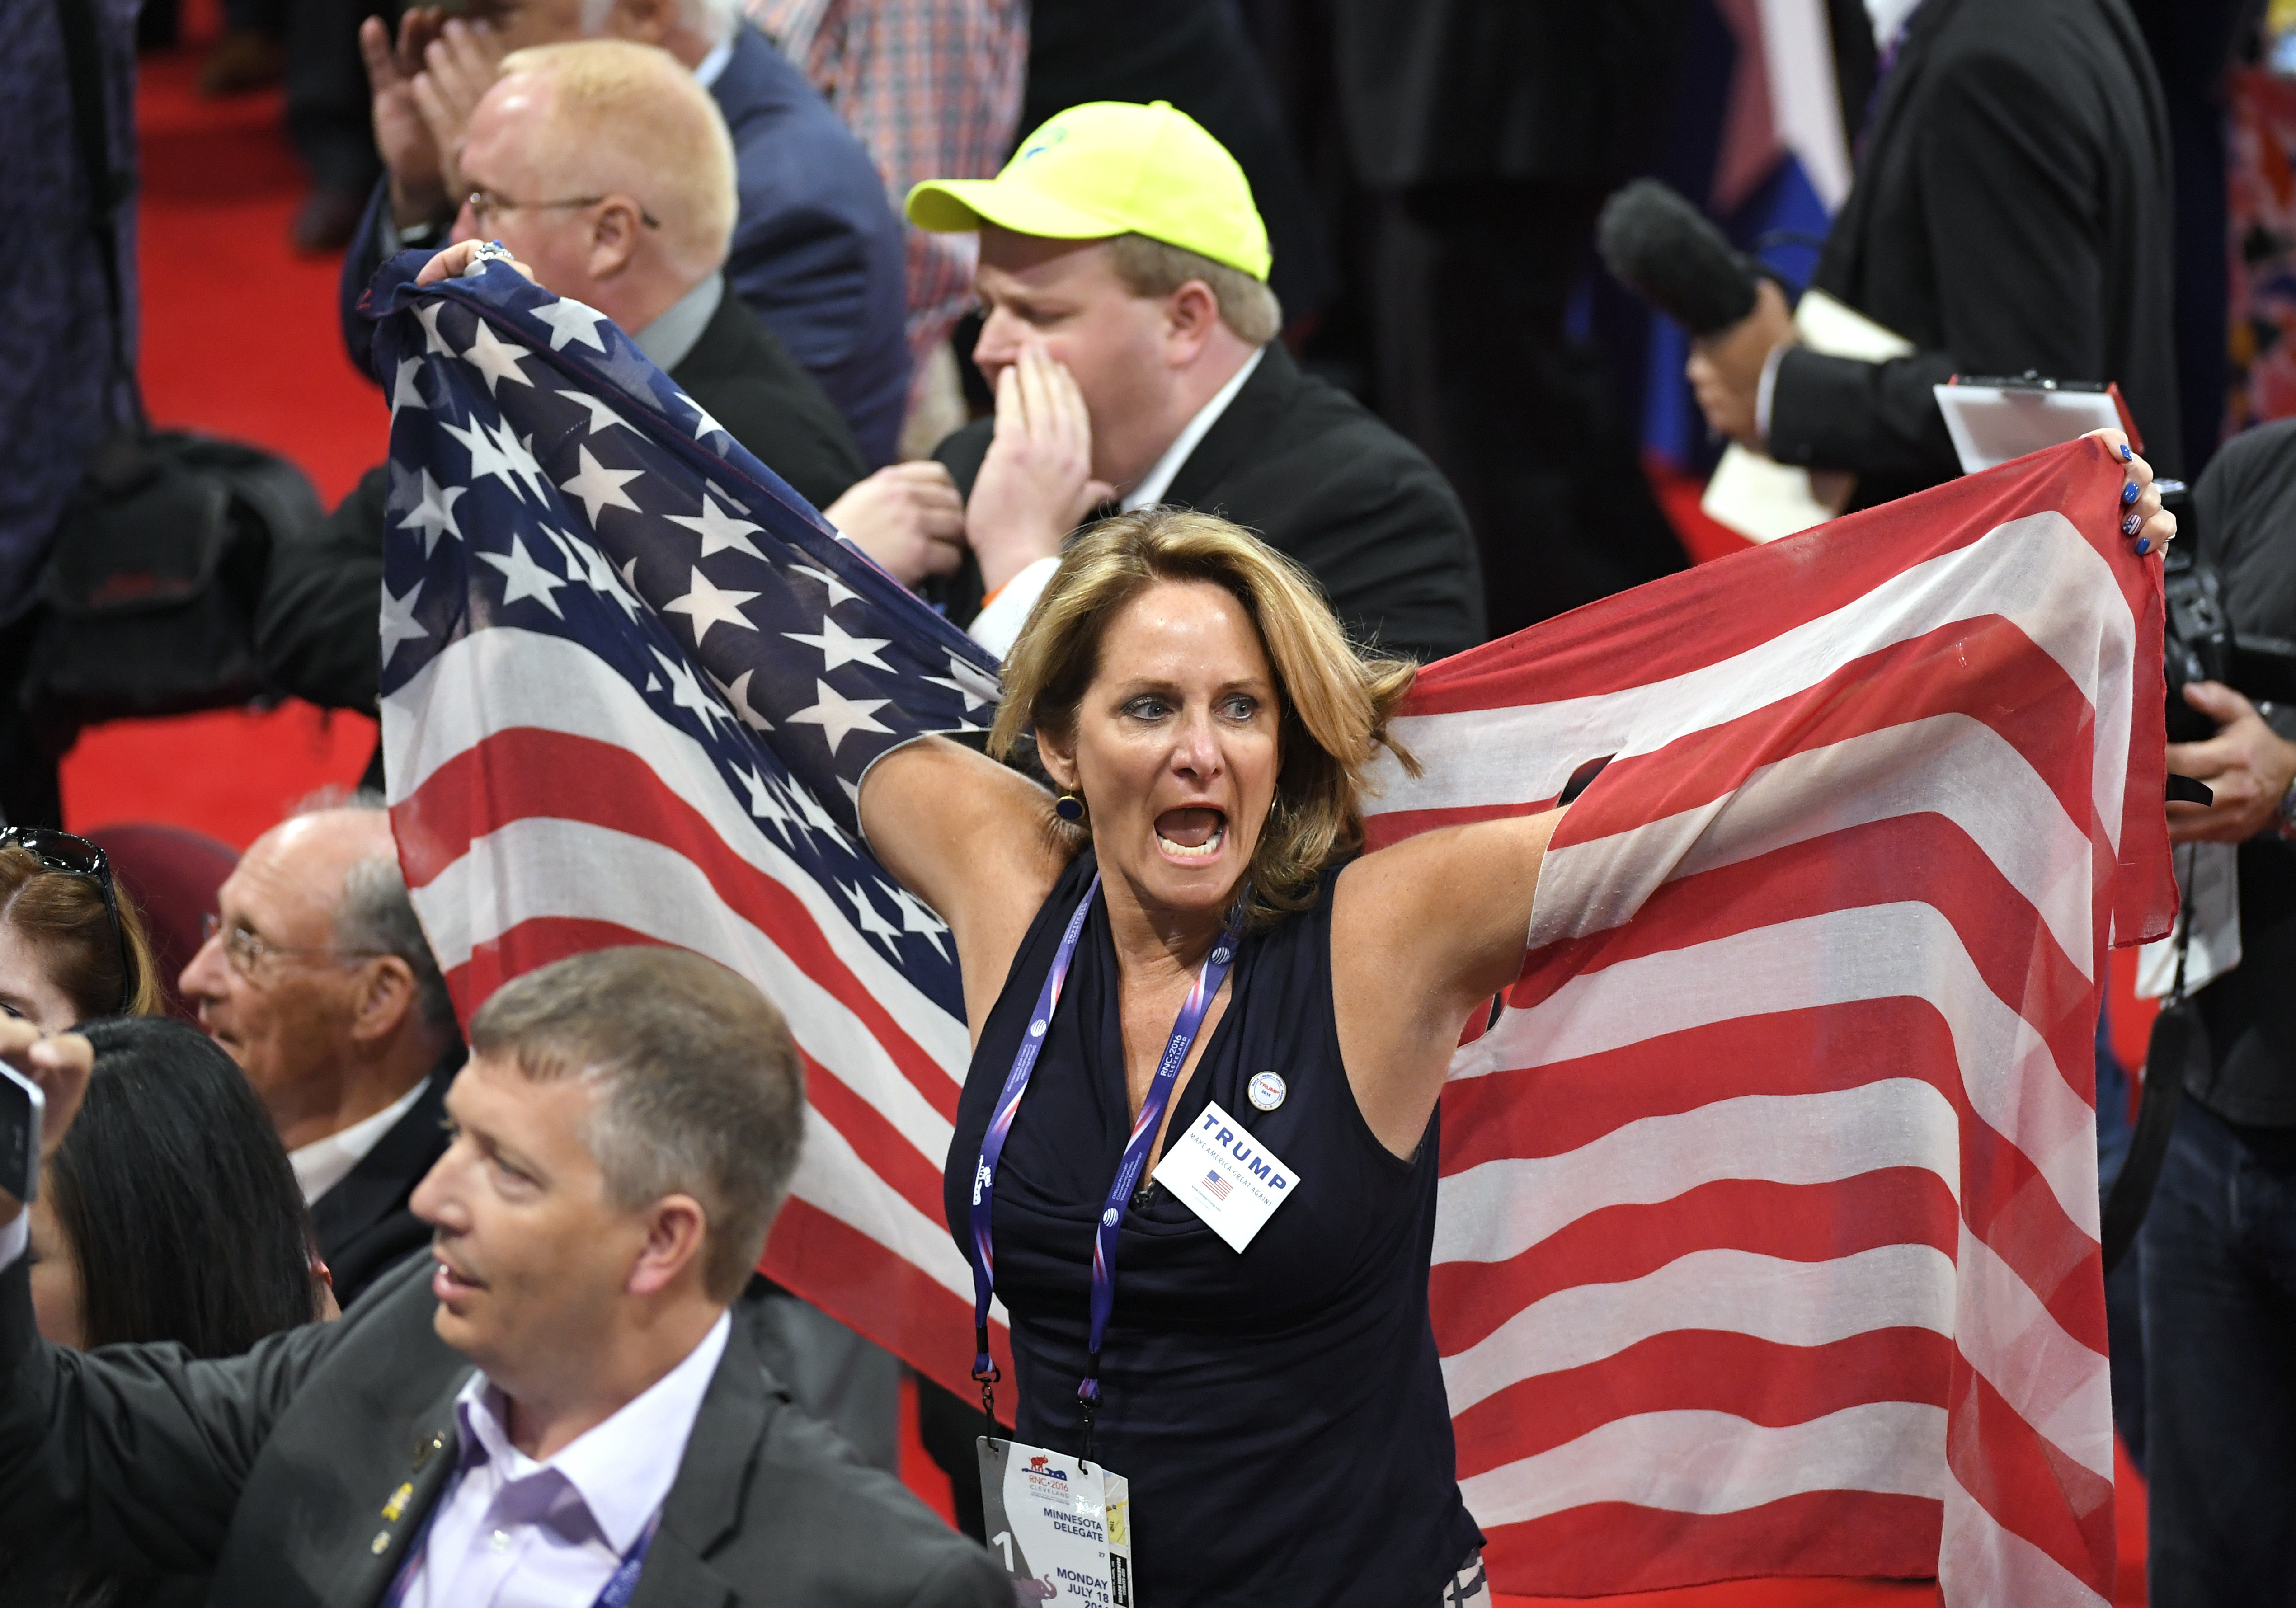 Delegates react as some delegates call for a roll call vote on the adoption of the rules during the opening day of the Republican National Convention in Cleveland, Monday, July 18, 2016. (AP Photo/Mark J. Terrill)